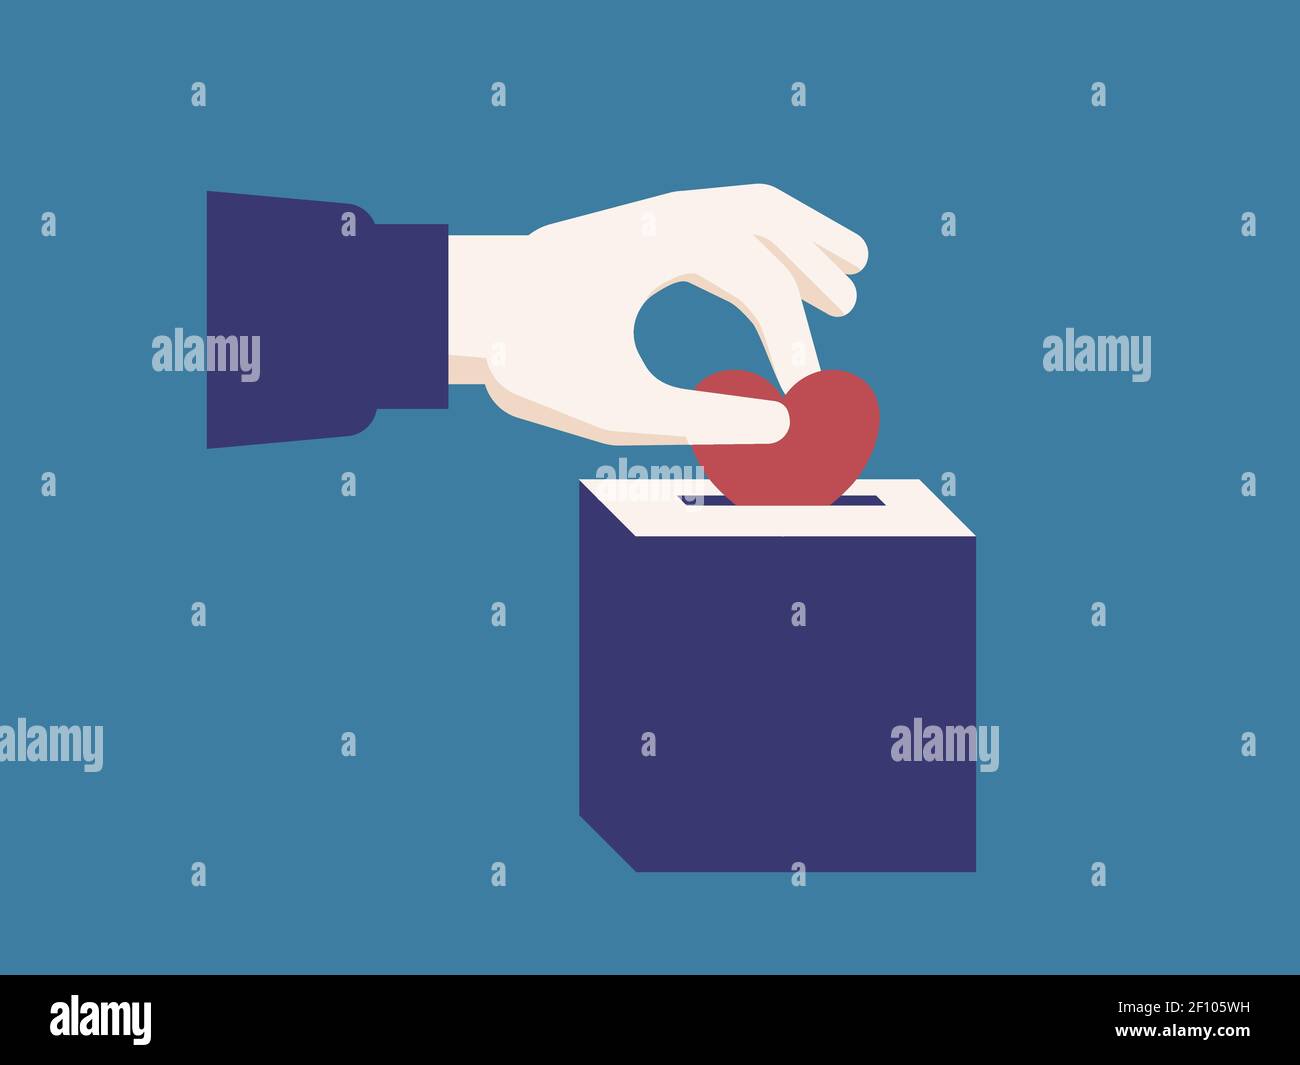 Donating for charity illustration. A persons hand putting a heart in a donation box. Icon symbol. Stock Vector